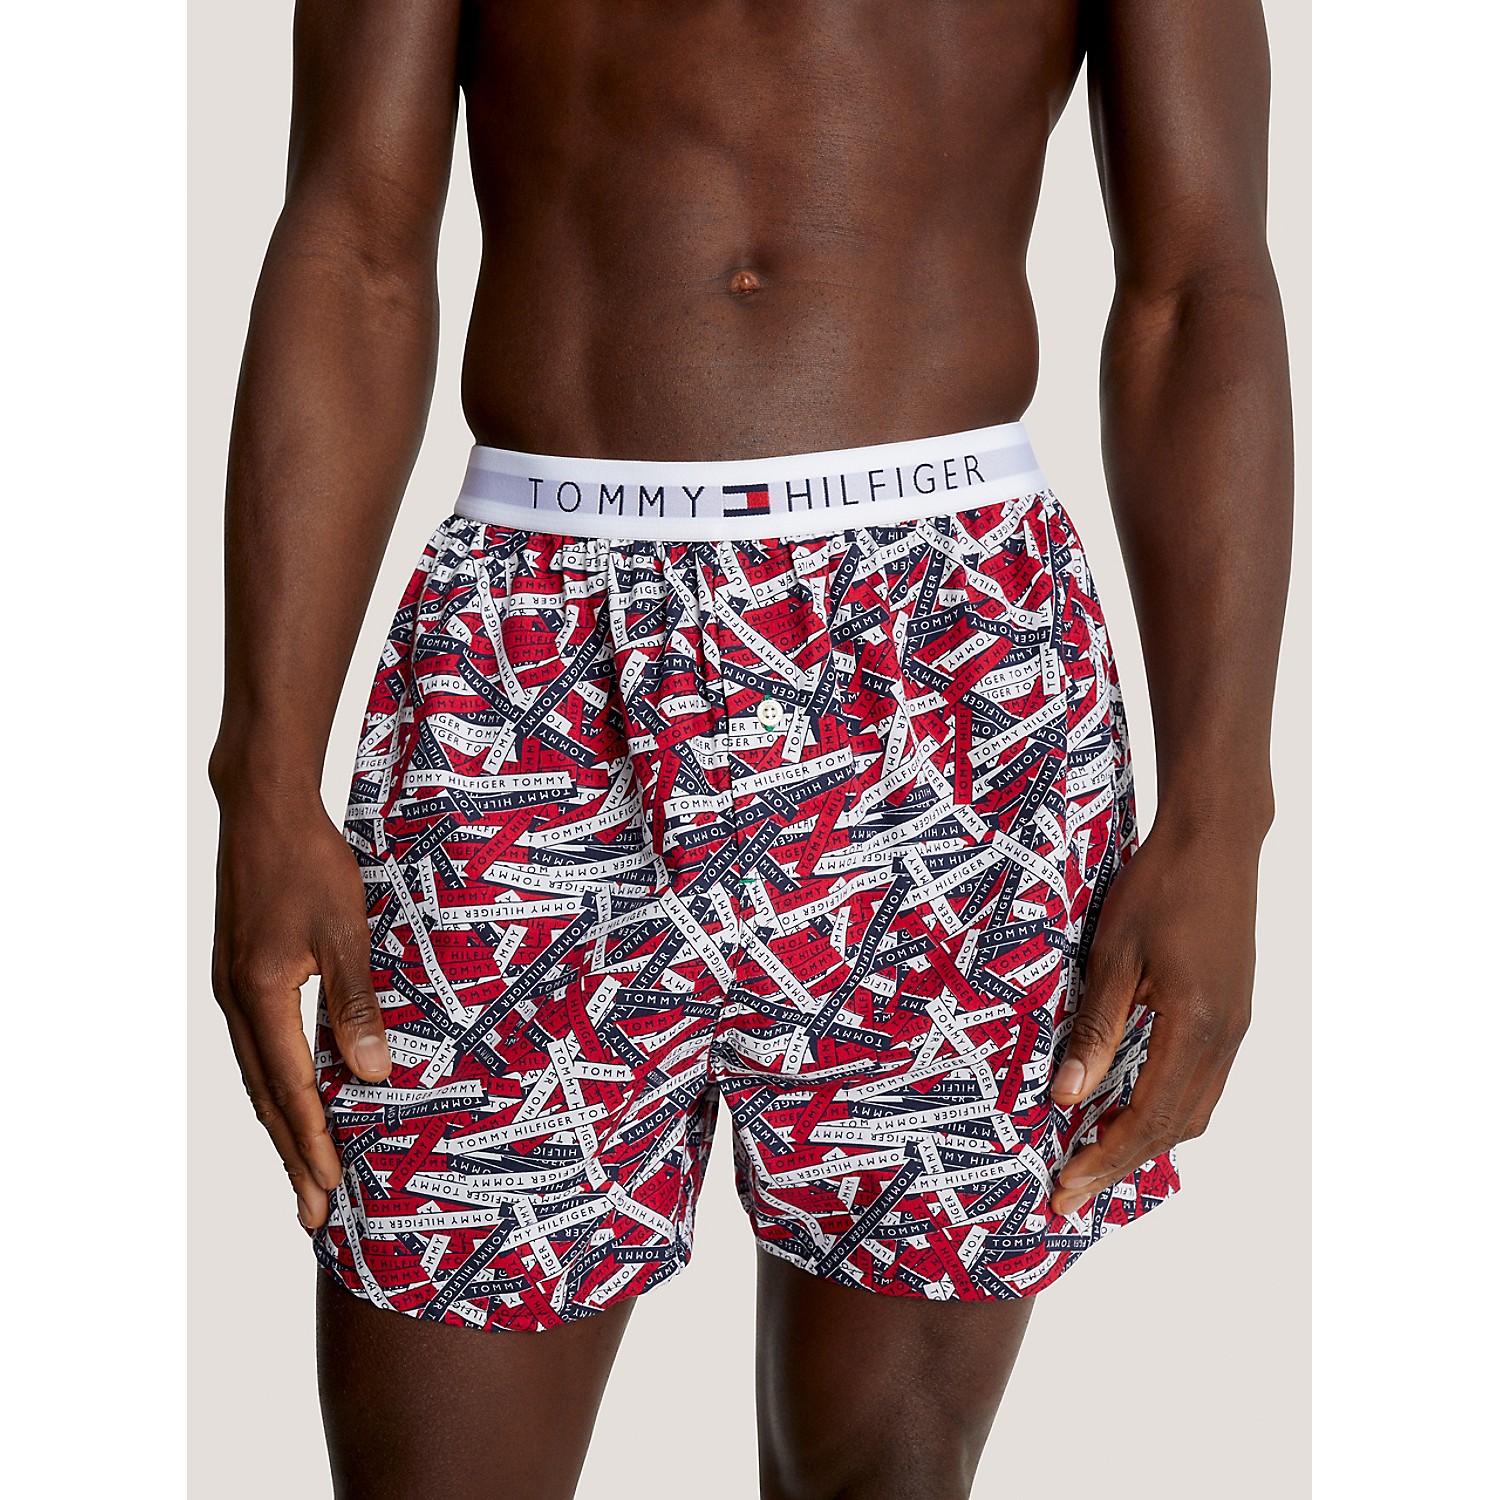 TOMMY HILFIGER Regular Fit Fashion Woven Boxer